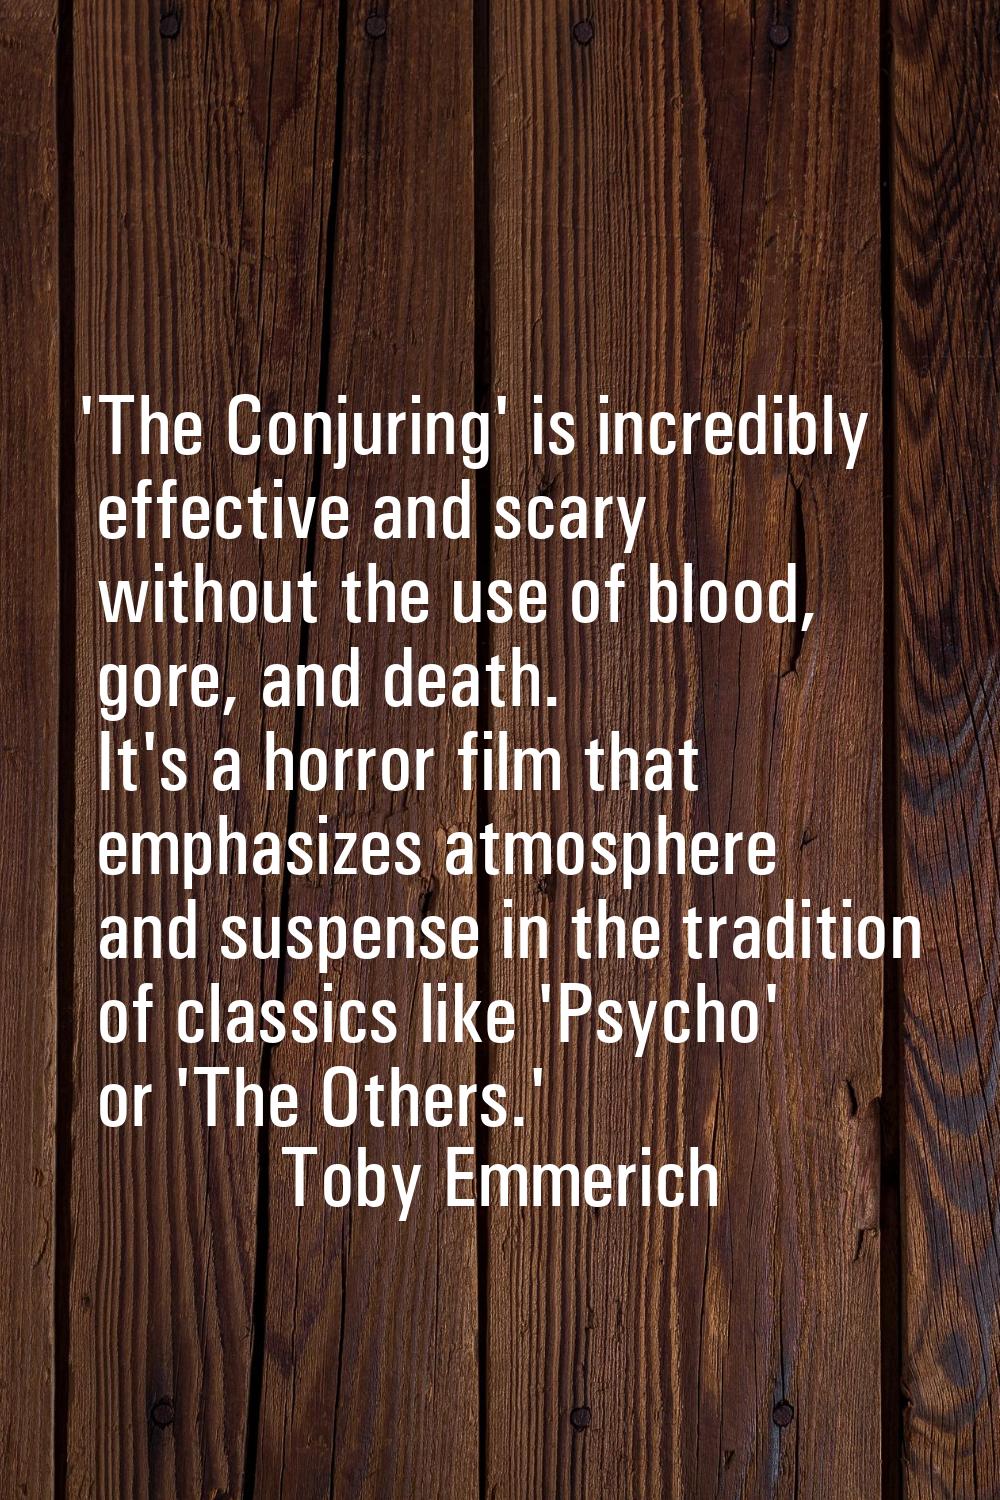 'The Conjuring' is incredibly effective and scary without the use of blood, gore, and death. It's a